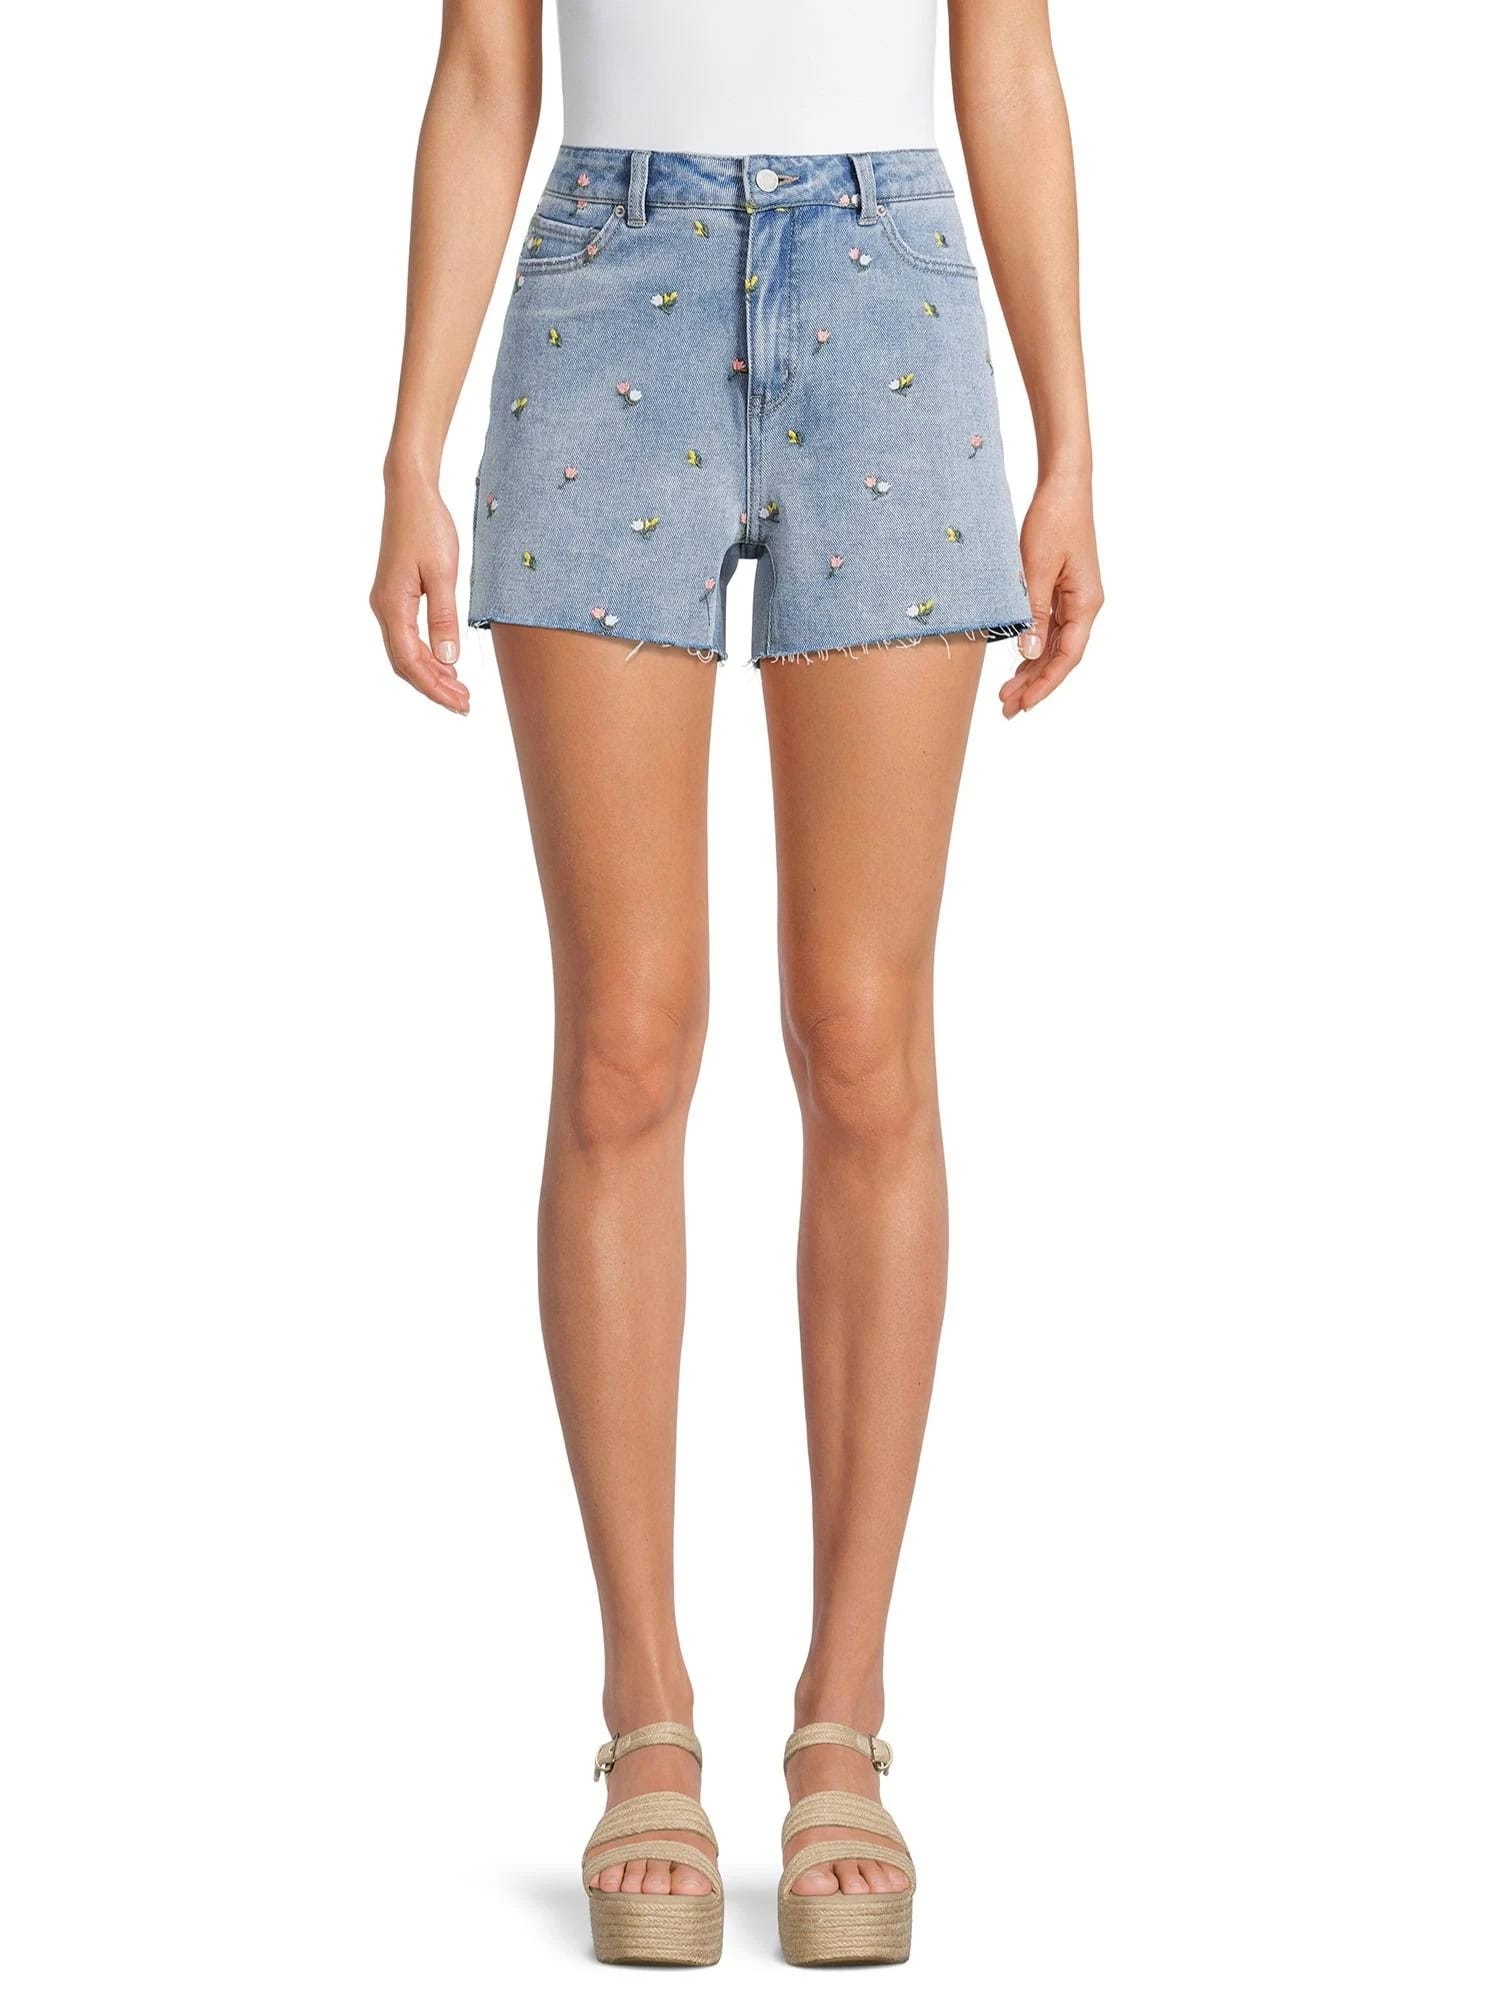 Colorful Embroidered Denim Shorts by Time and Tru | Image